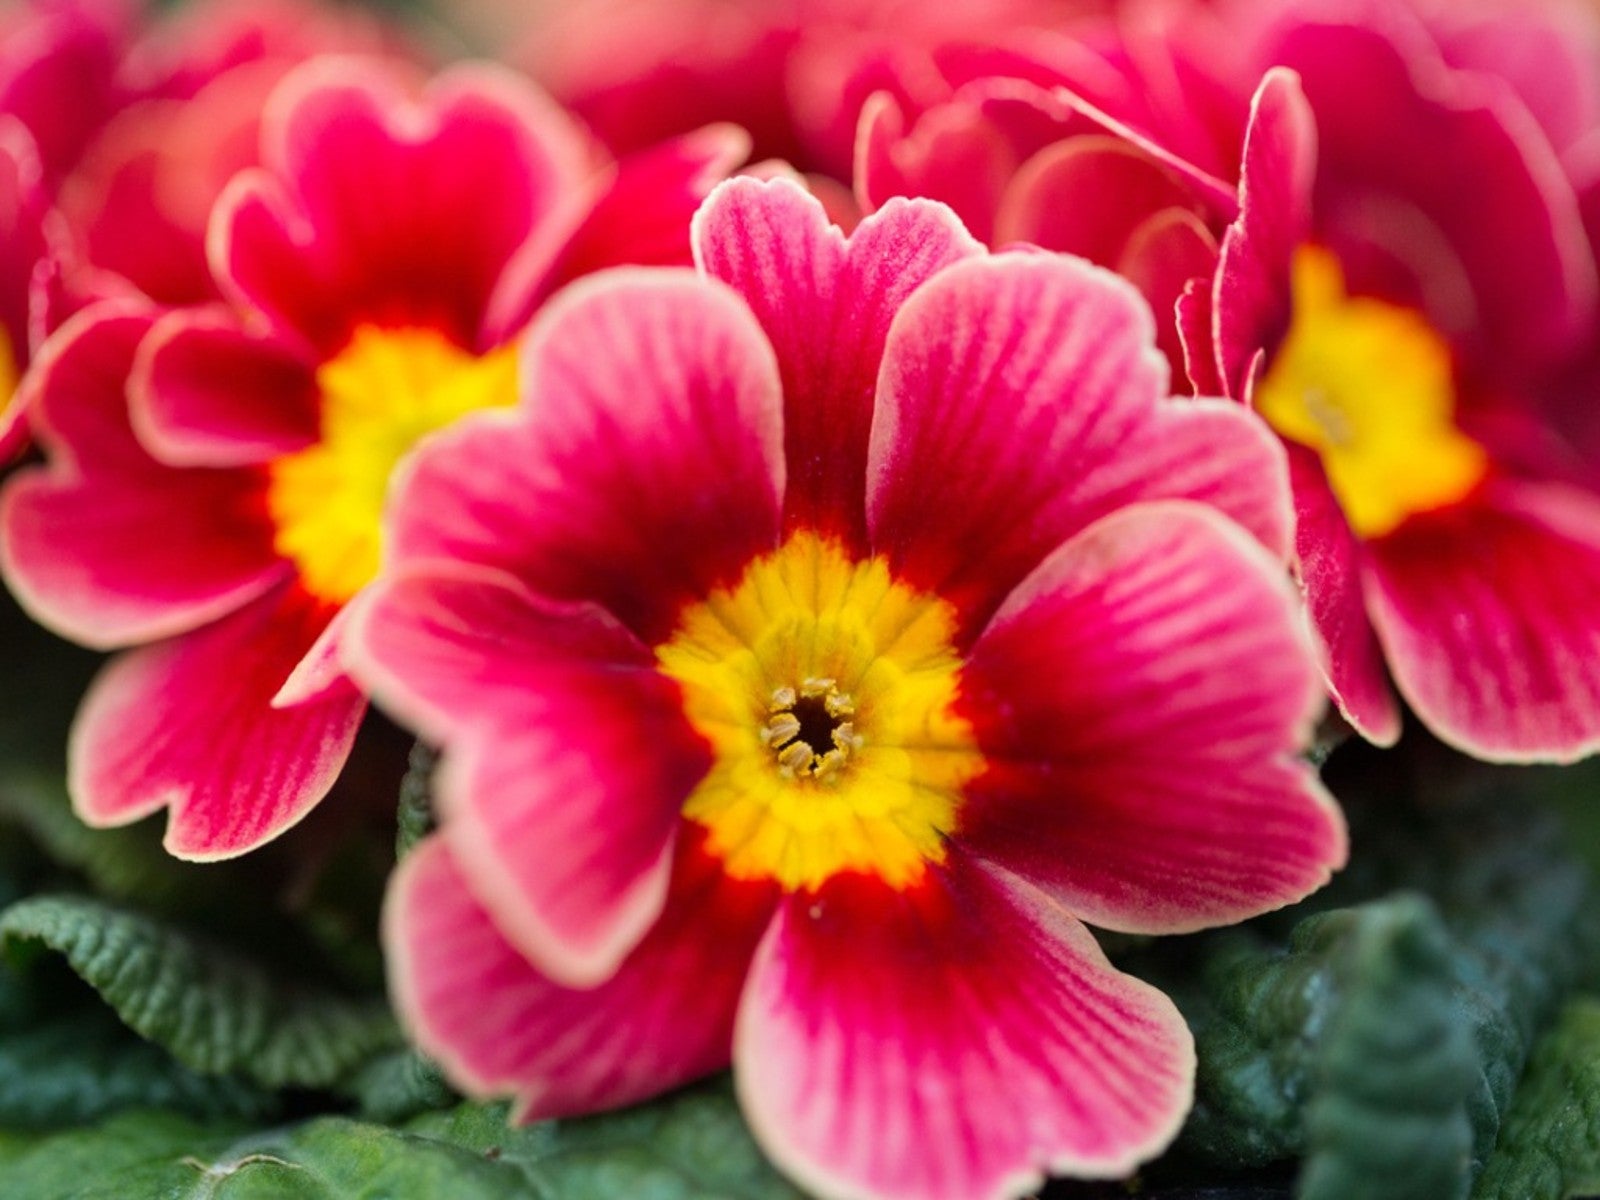 caring for primrose plants: how to grow and care for primrose